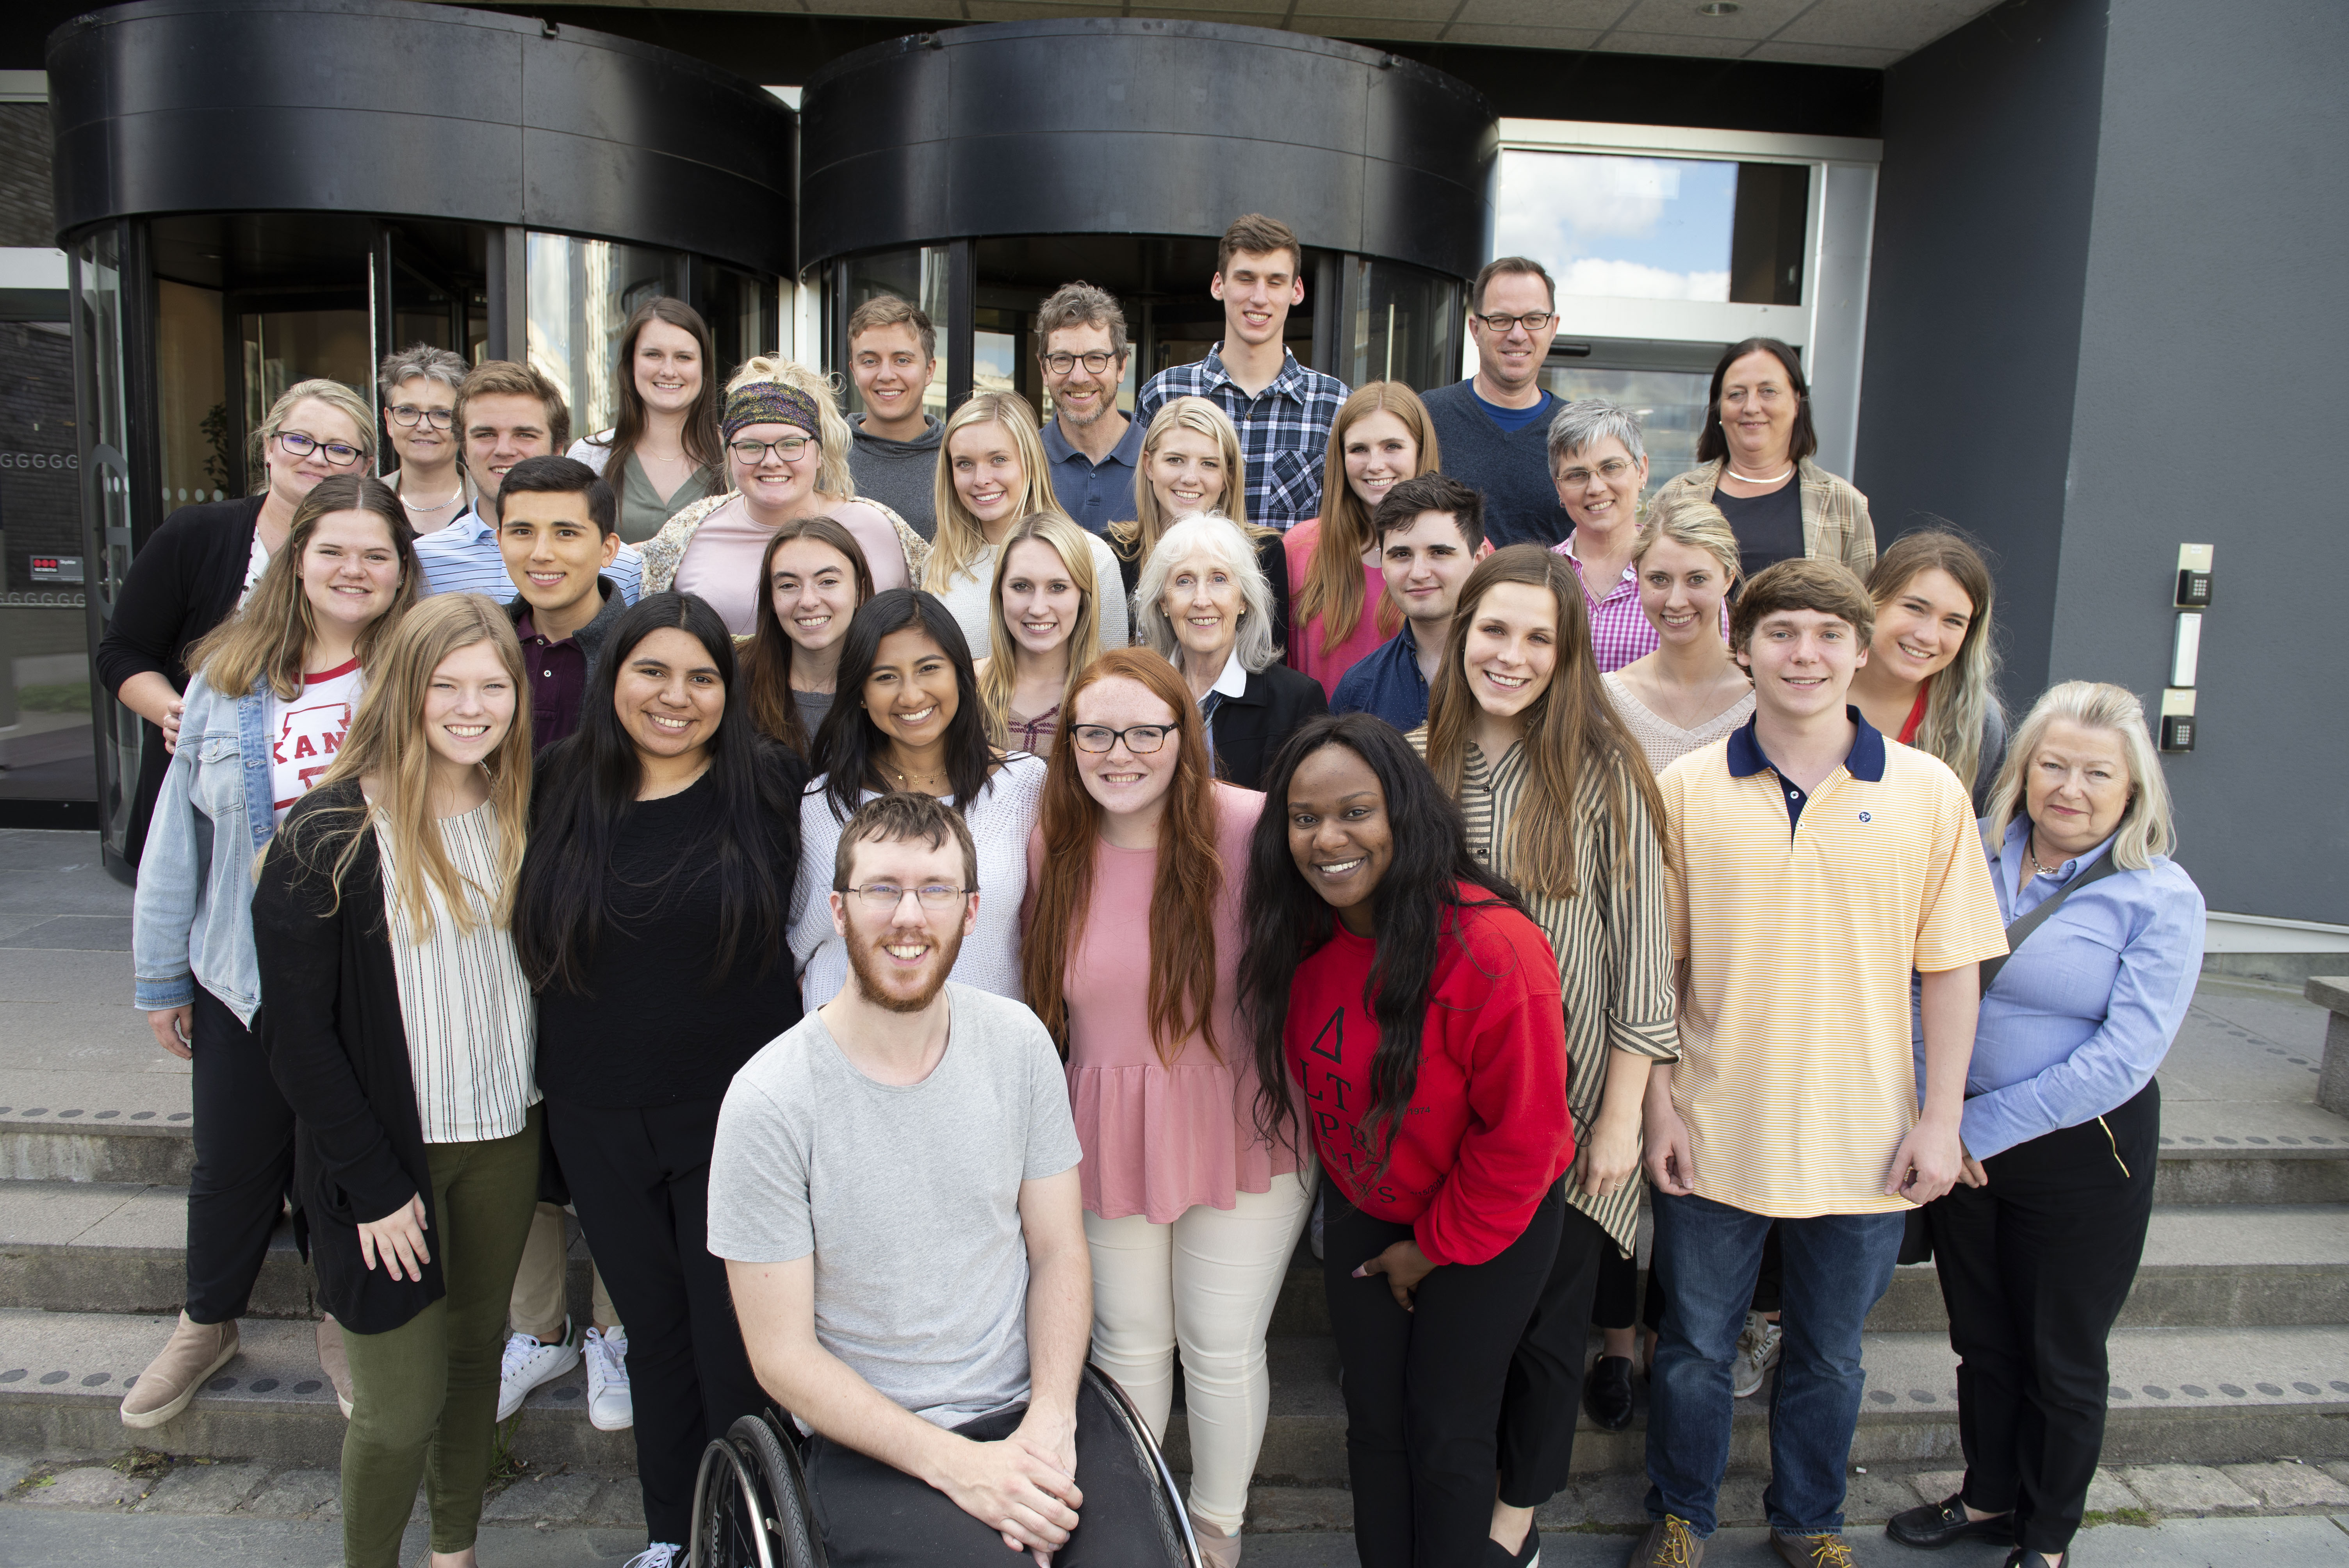 Twenty-two students and eight teachers and researchers from the University of Arkansas visited the School of Health and Welfare for two weeks in May. Christoffer Wadman, teaching assistant at the School of Engineering, told the American guests about his experience with the Swedish healthcare system.